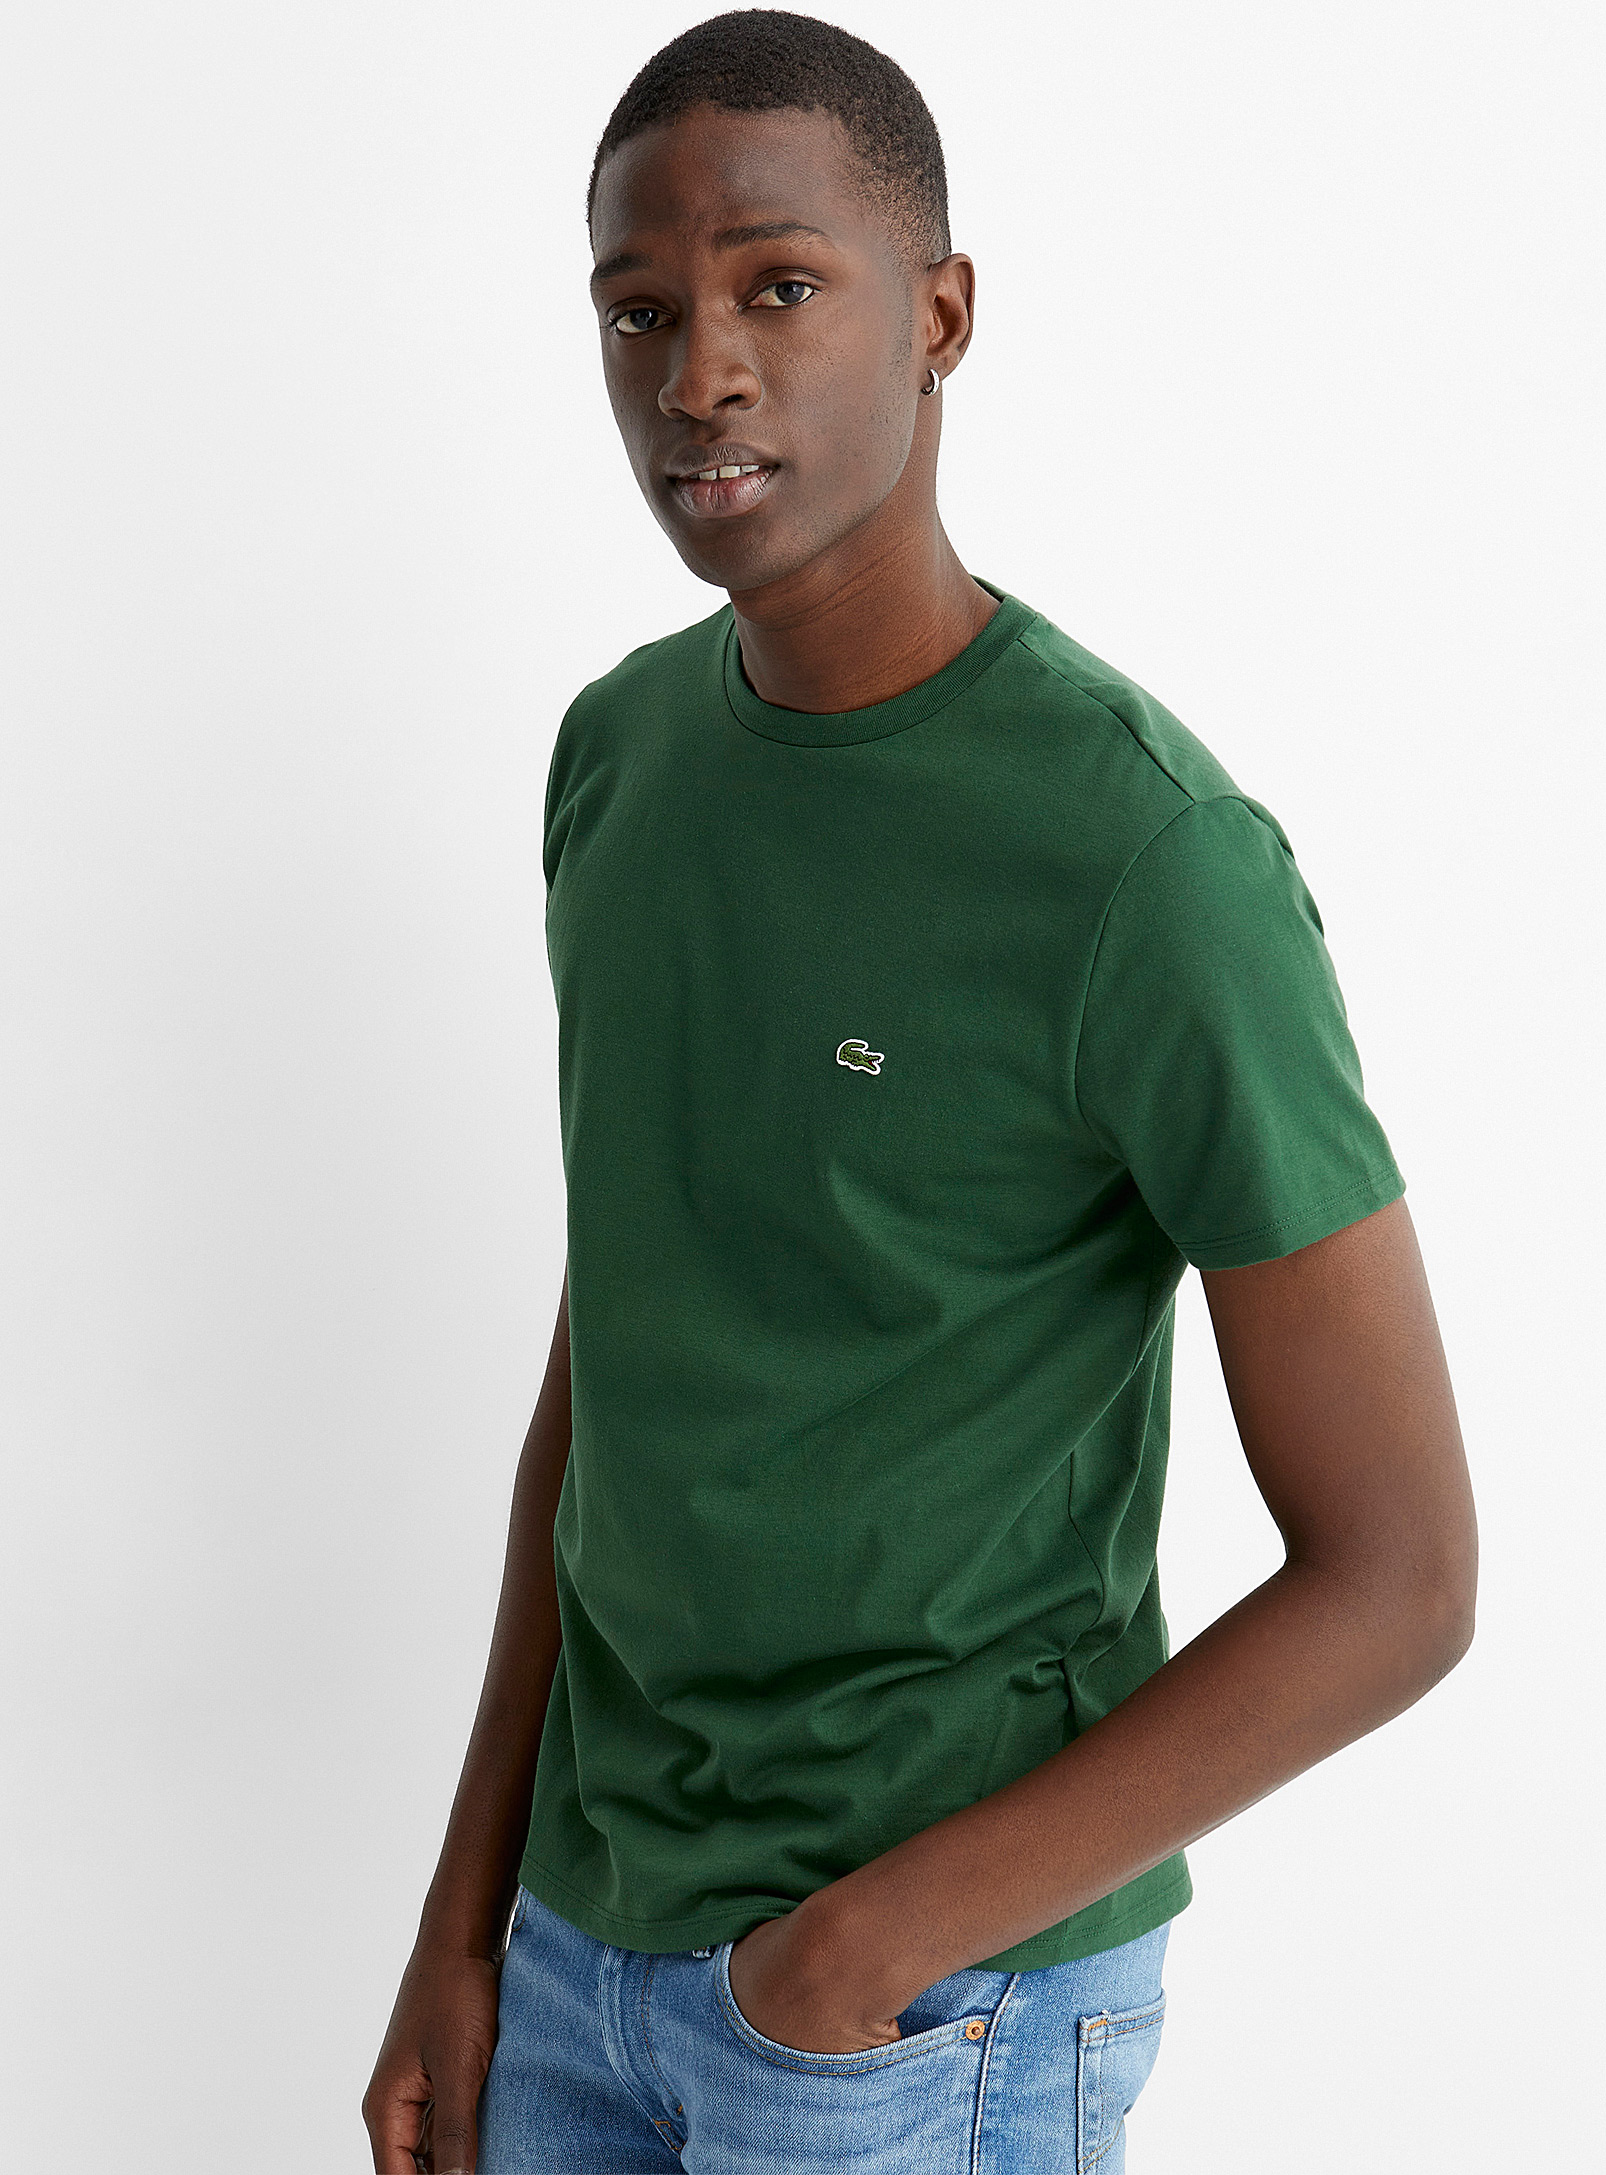 Lacoste Croc Crew-neck T-shirt In Mossy Green